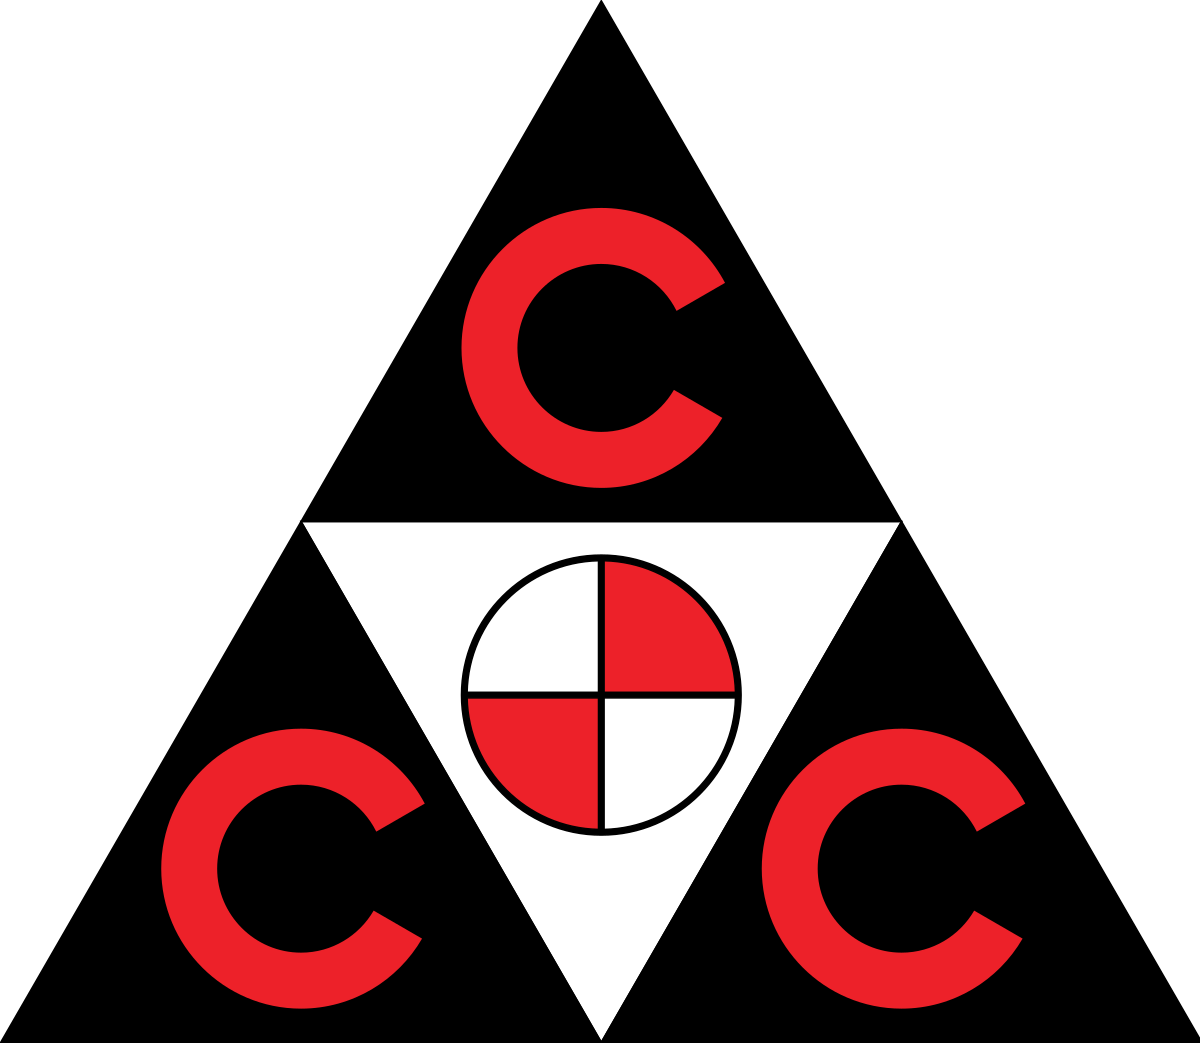 Consolidated Contractors Company - CCC.png